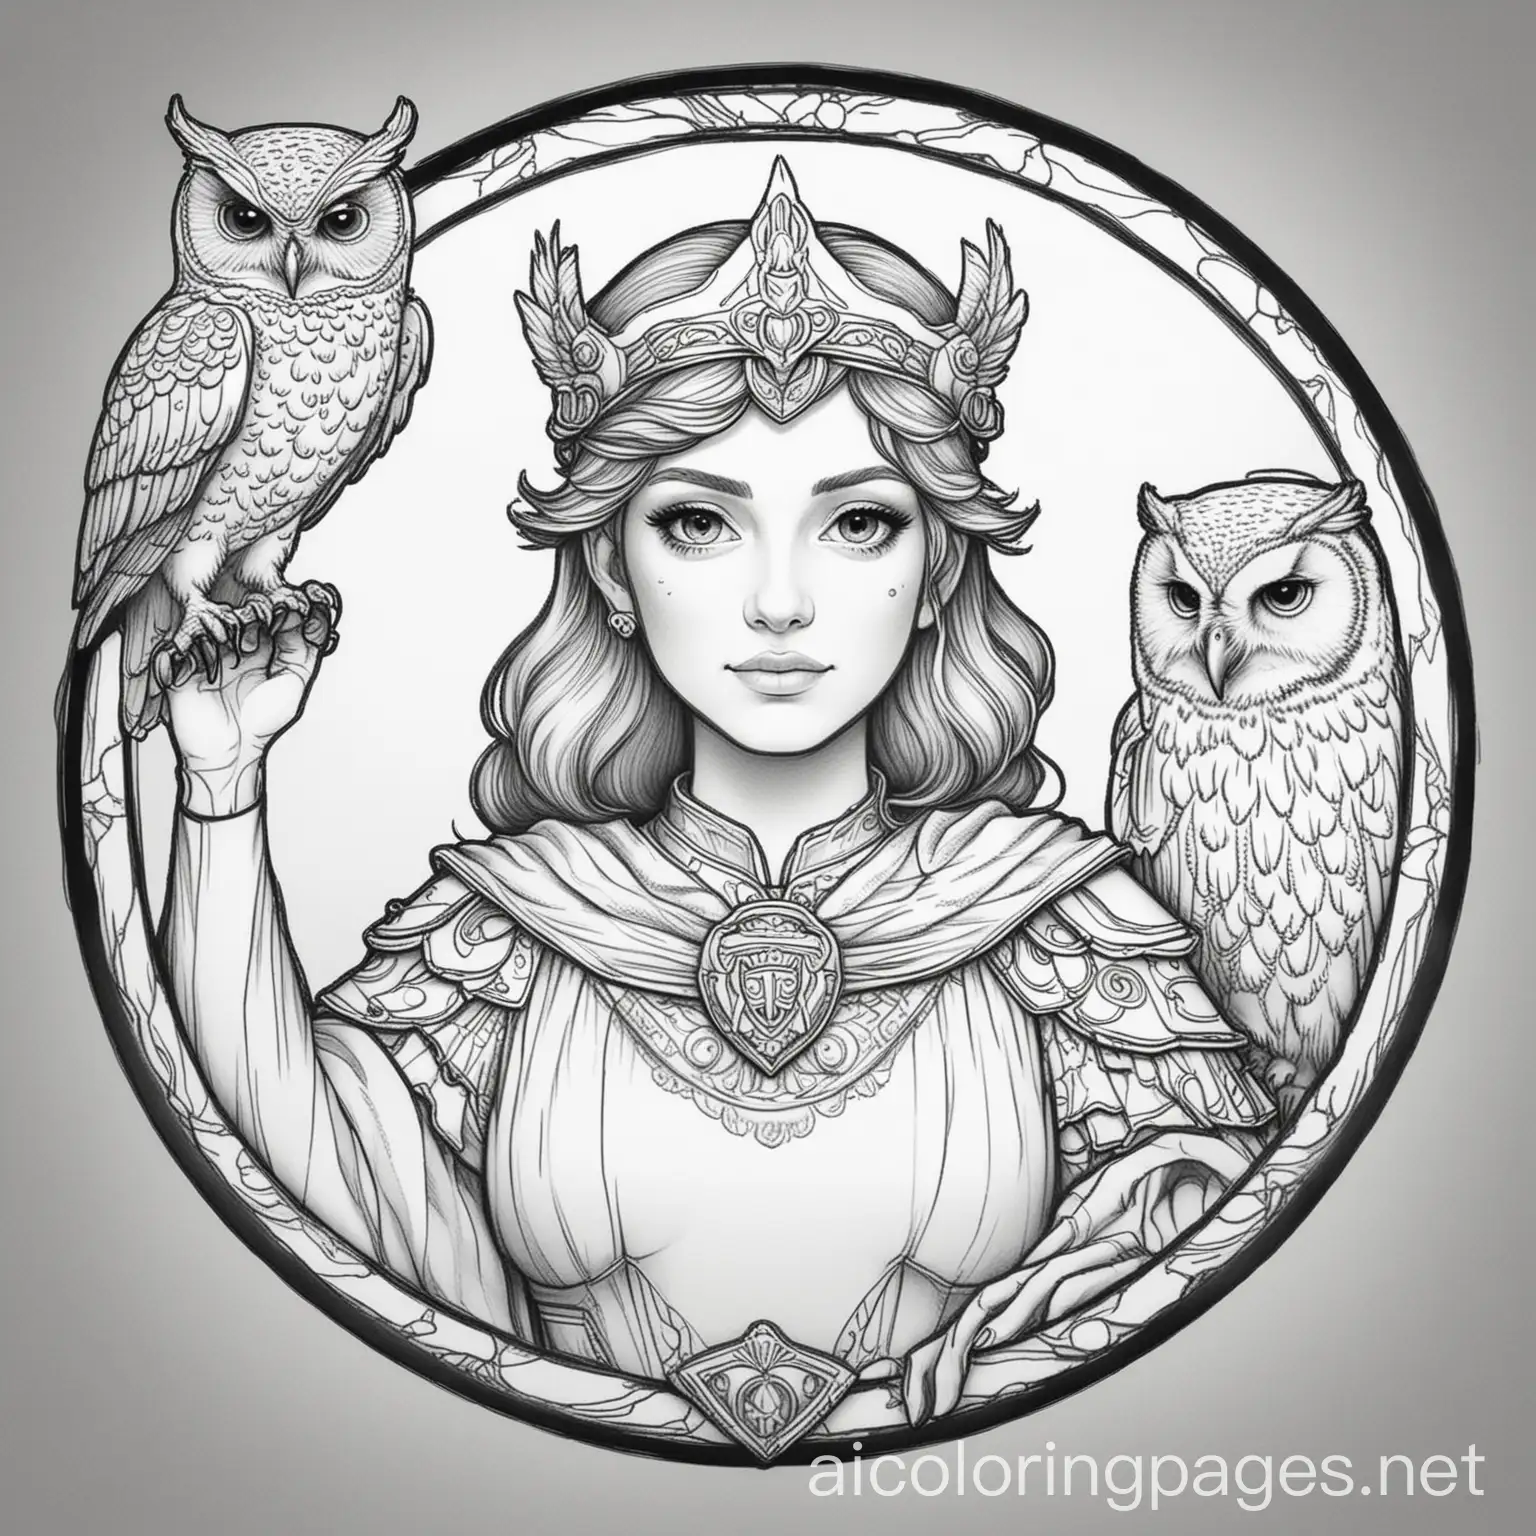 Design a coloring book image of Minerva, shown with her helmet, shield, and owl, in black and white outline, Coloring Page, black and white, line art, white background, Simplicity, Ample White Space. The background of the coloring page is plain white to make it easy for young children to color within the lines. The outlines of all the subjects are easy to distinguish, making it simple for kids to color without too much difficulty